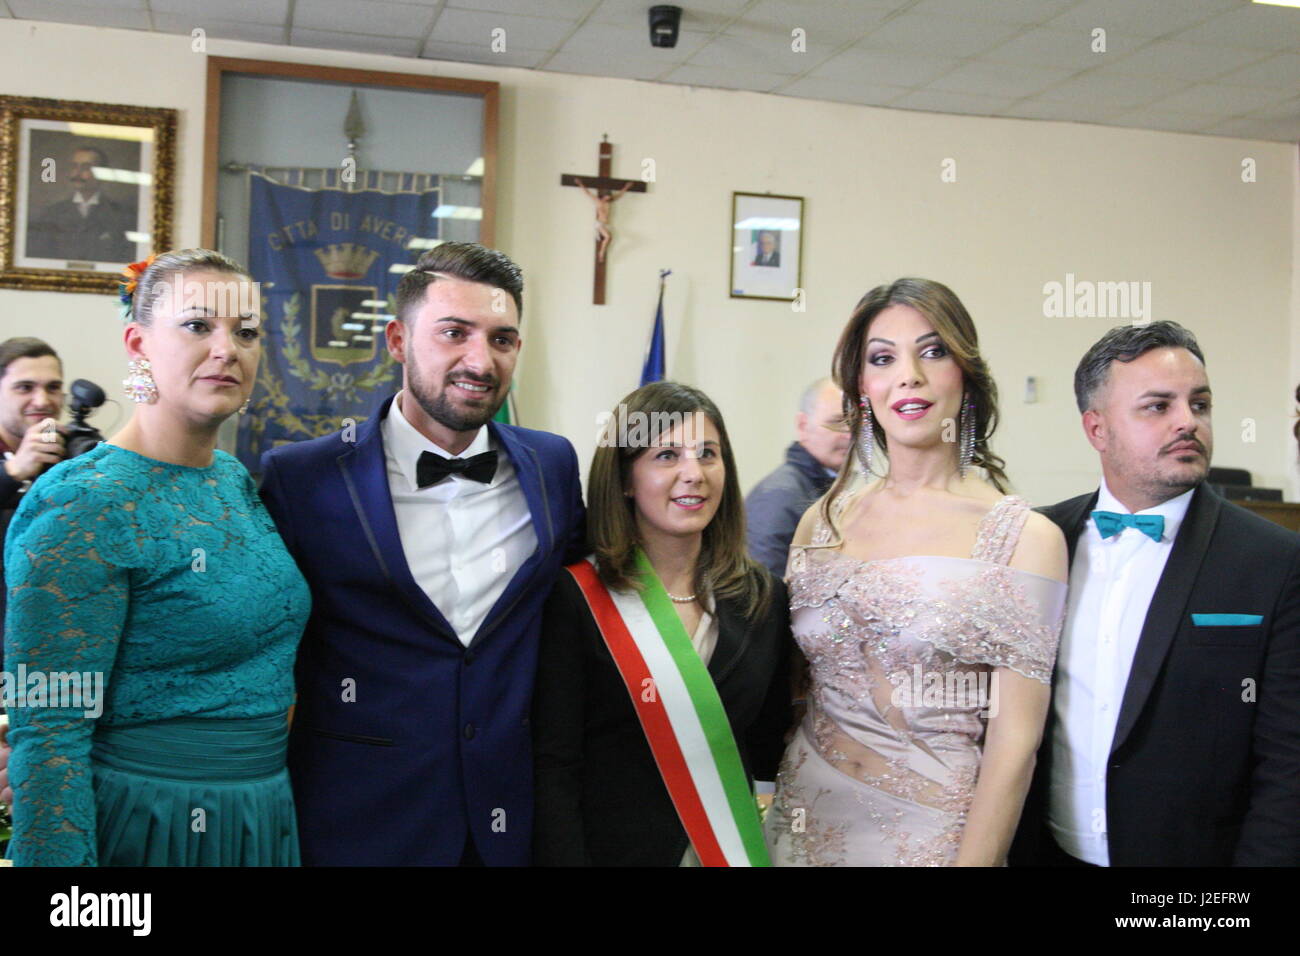 Aversa, Italy. 27th Apr, 2017. Alessia marries first trans marriage Alessia Cinquegrana, ex-miss Trans, who has been awarded the female gender recognition and recognition of the new status without going through surgery, married Aversa Town Hall with comrade Michele Picone.In picture in order L to R:wedding witness, Michele Picone, registrar, Alessia Cinquegrana, wedding witness Credit: Salvatore Esposito/Pacific Press/Alamy Live News Stock Photo